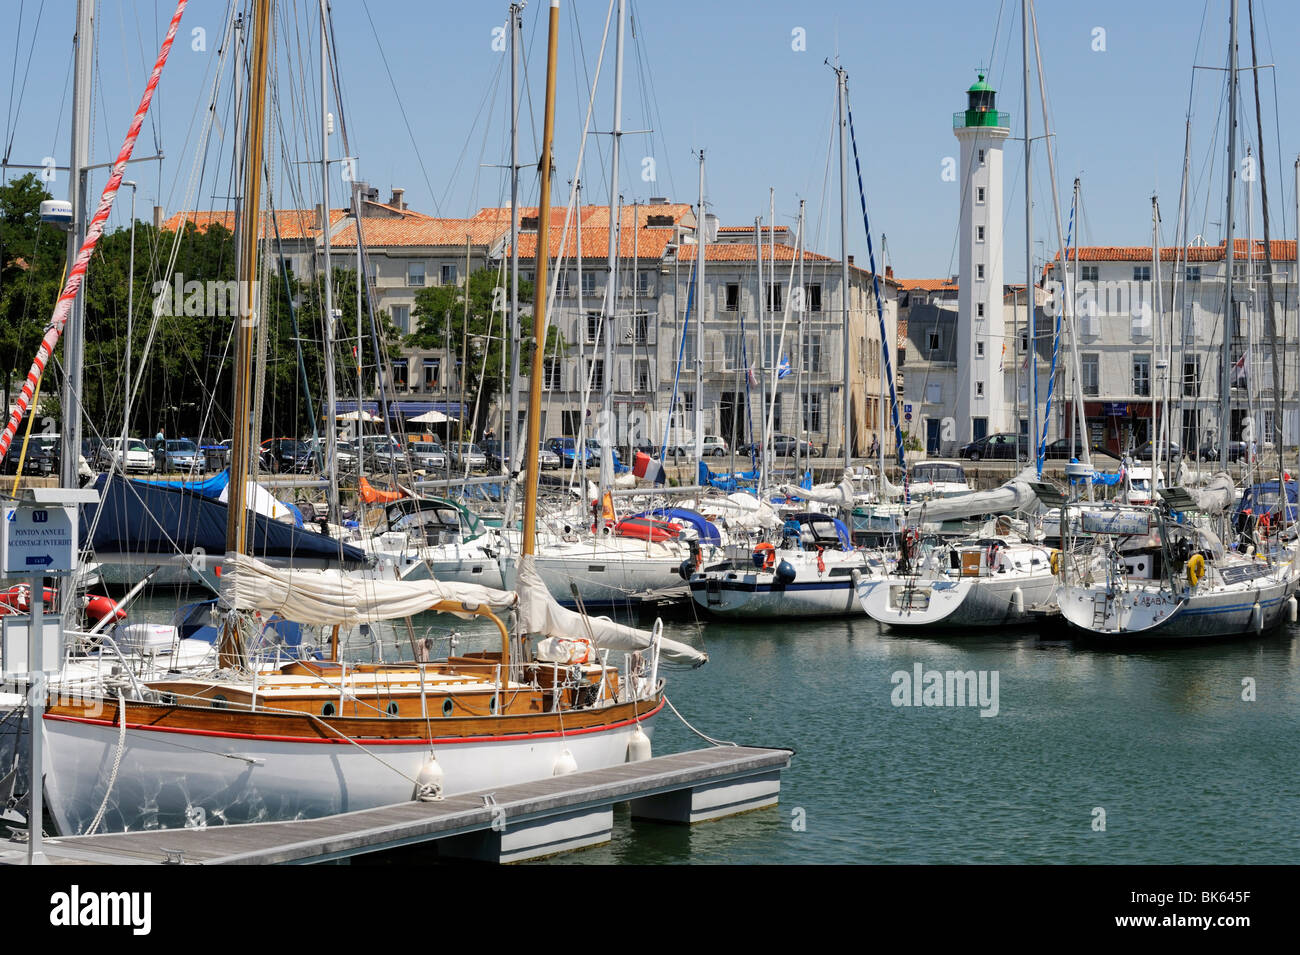 General view of the Yatch basin and lighthouse, La Rochelle, Charente-Maritime, France, Europe Stock Photo